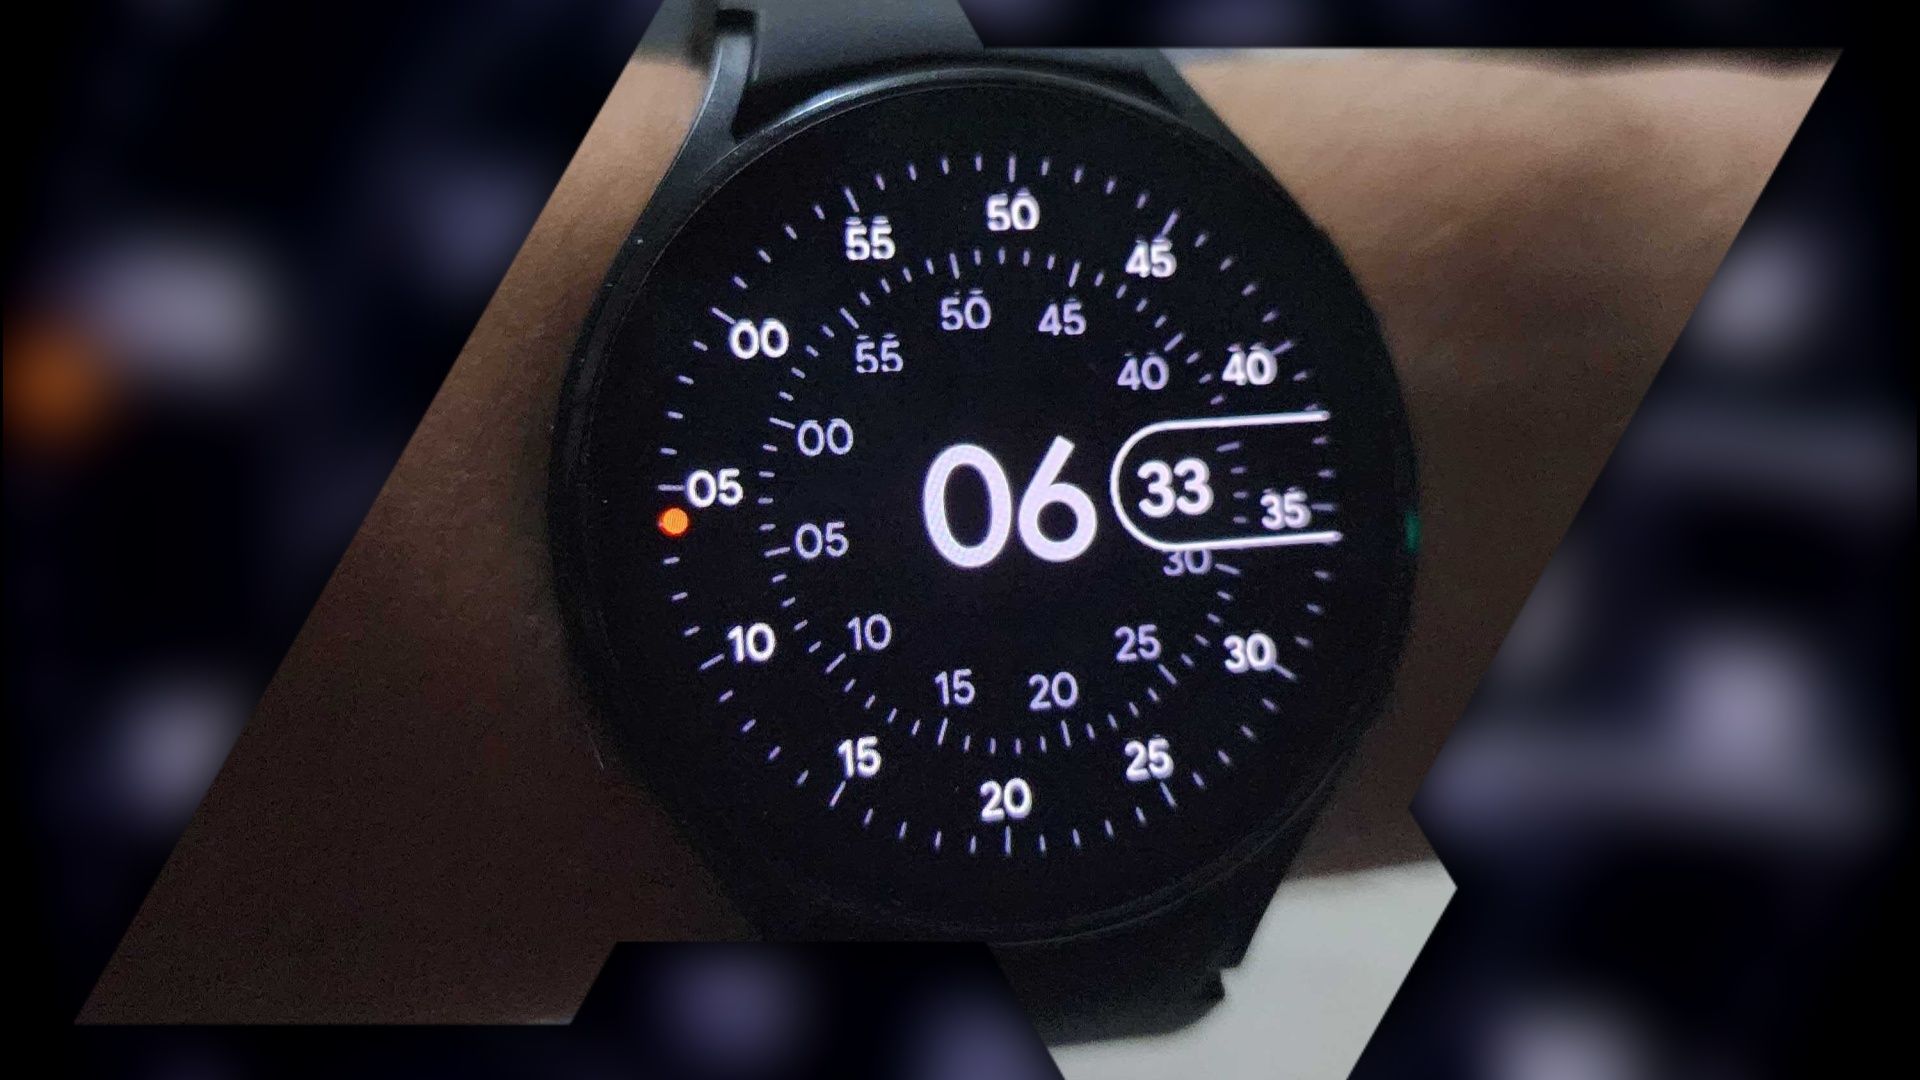 Download all the watch faces from the Pixel Watch and use them on your Wear OS device